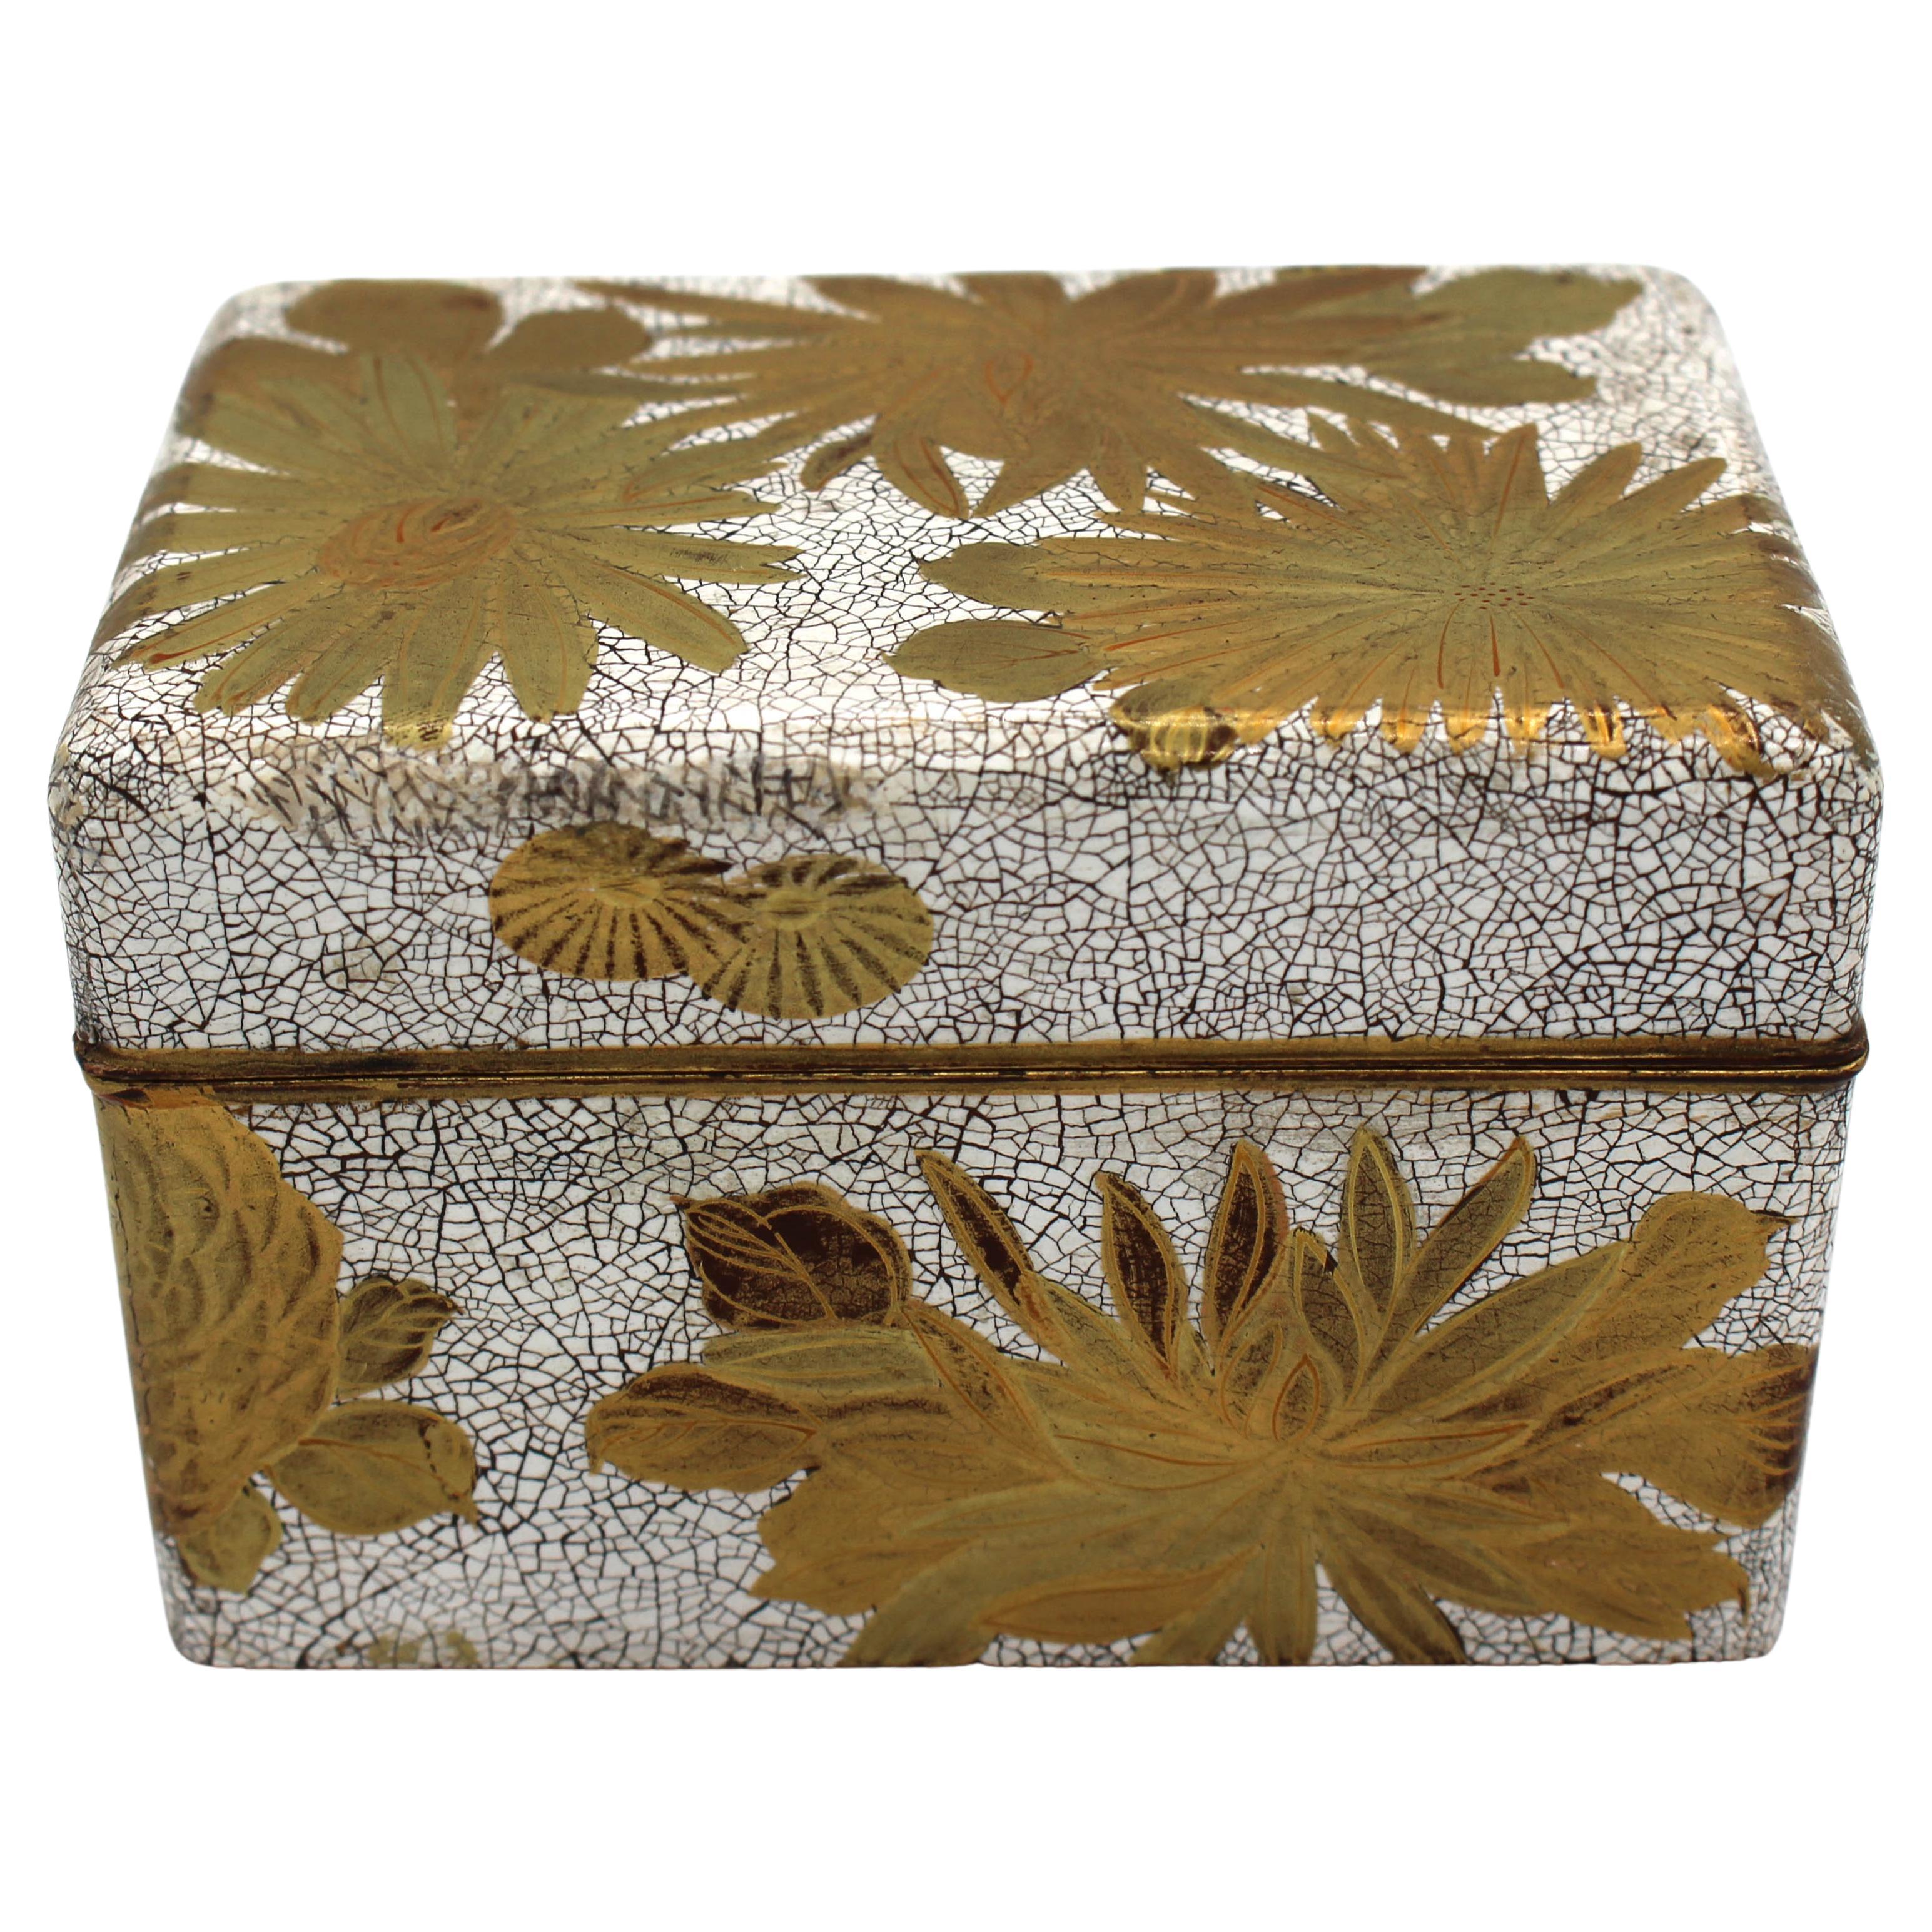 Early 20th Century Lacquer Box, Japanese. Late Meiji period